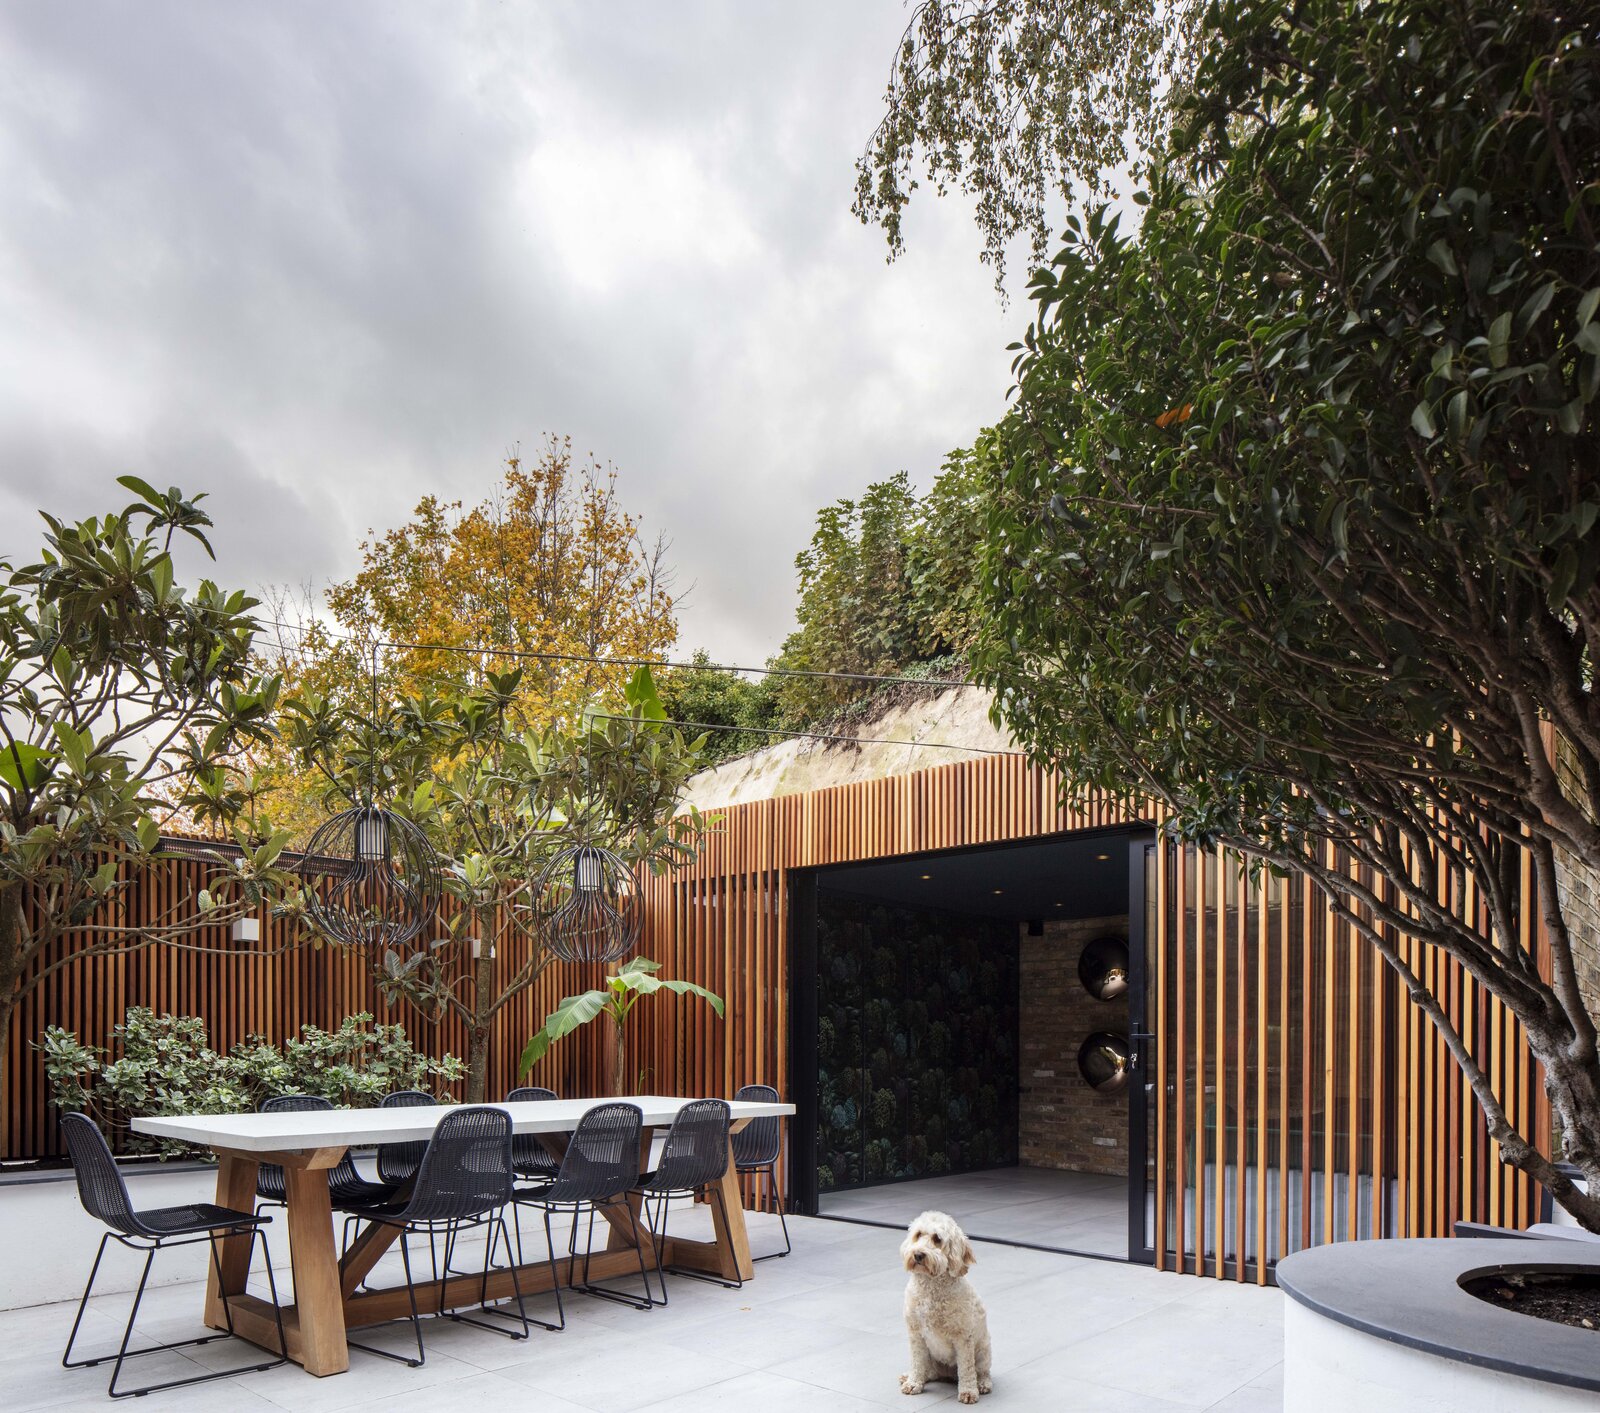 Timber Slatting Steals the Show at This Renovated Terrace House in London